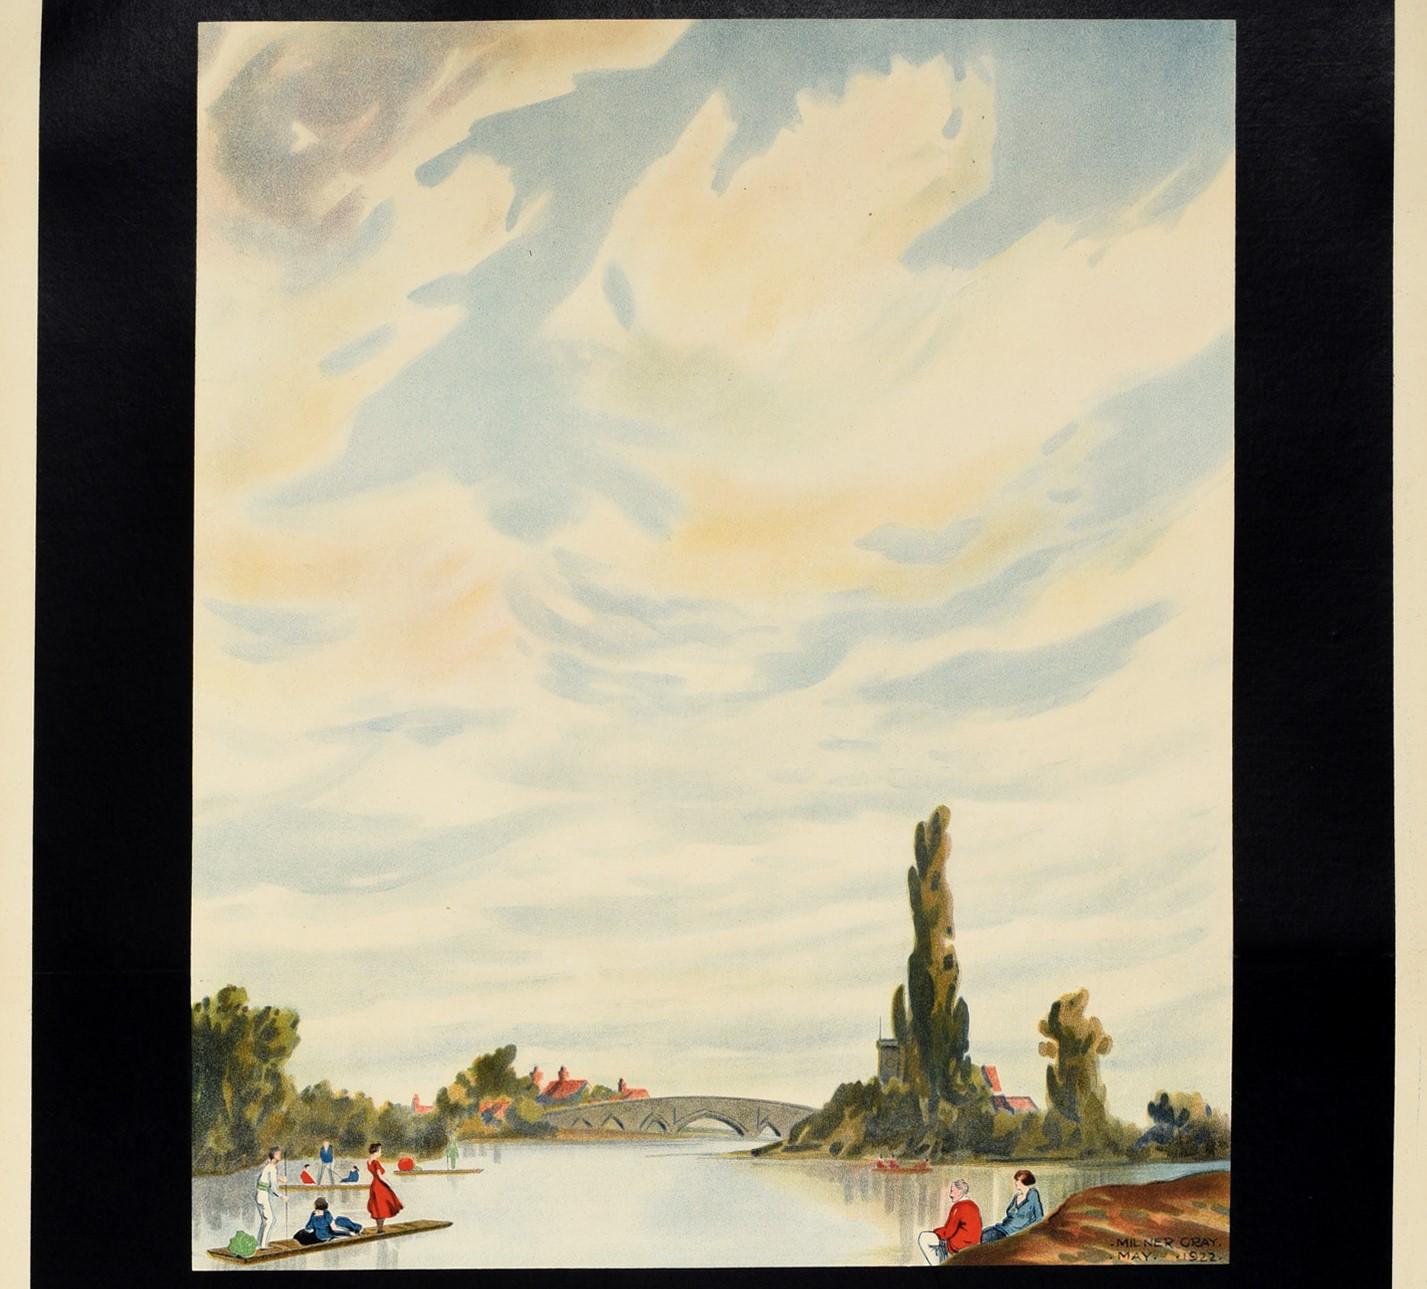 Original vintage travel poster for the Fair Land of Kent featuring scenic artwork by Milner Gray (1899-1997) of The River Medway in South East England depicting people sitting on the river bank watching people punting on rowing boats on the calm